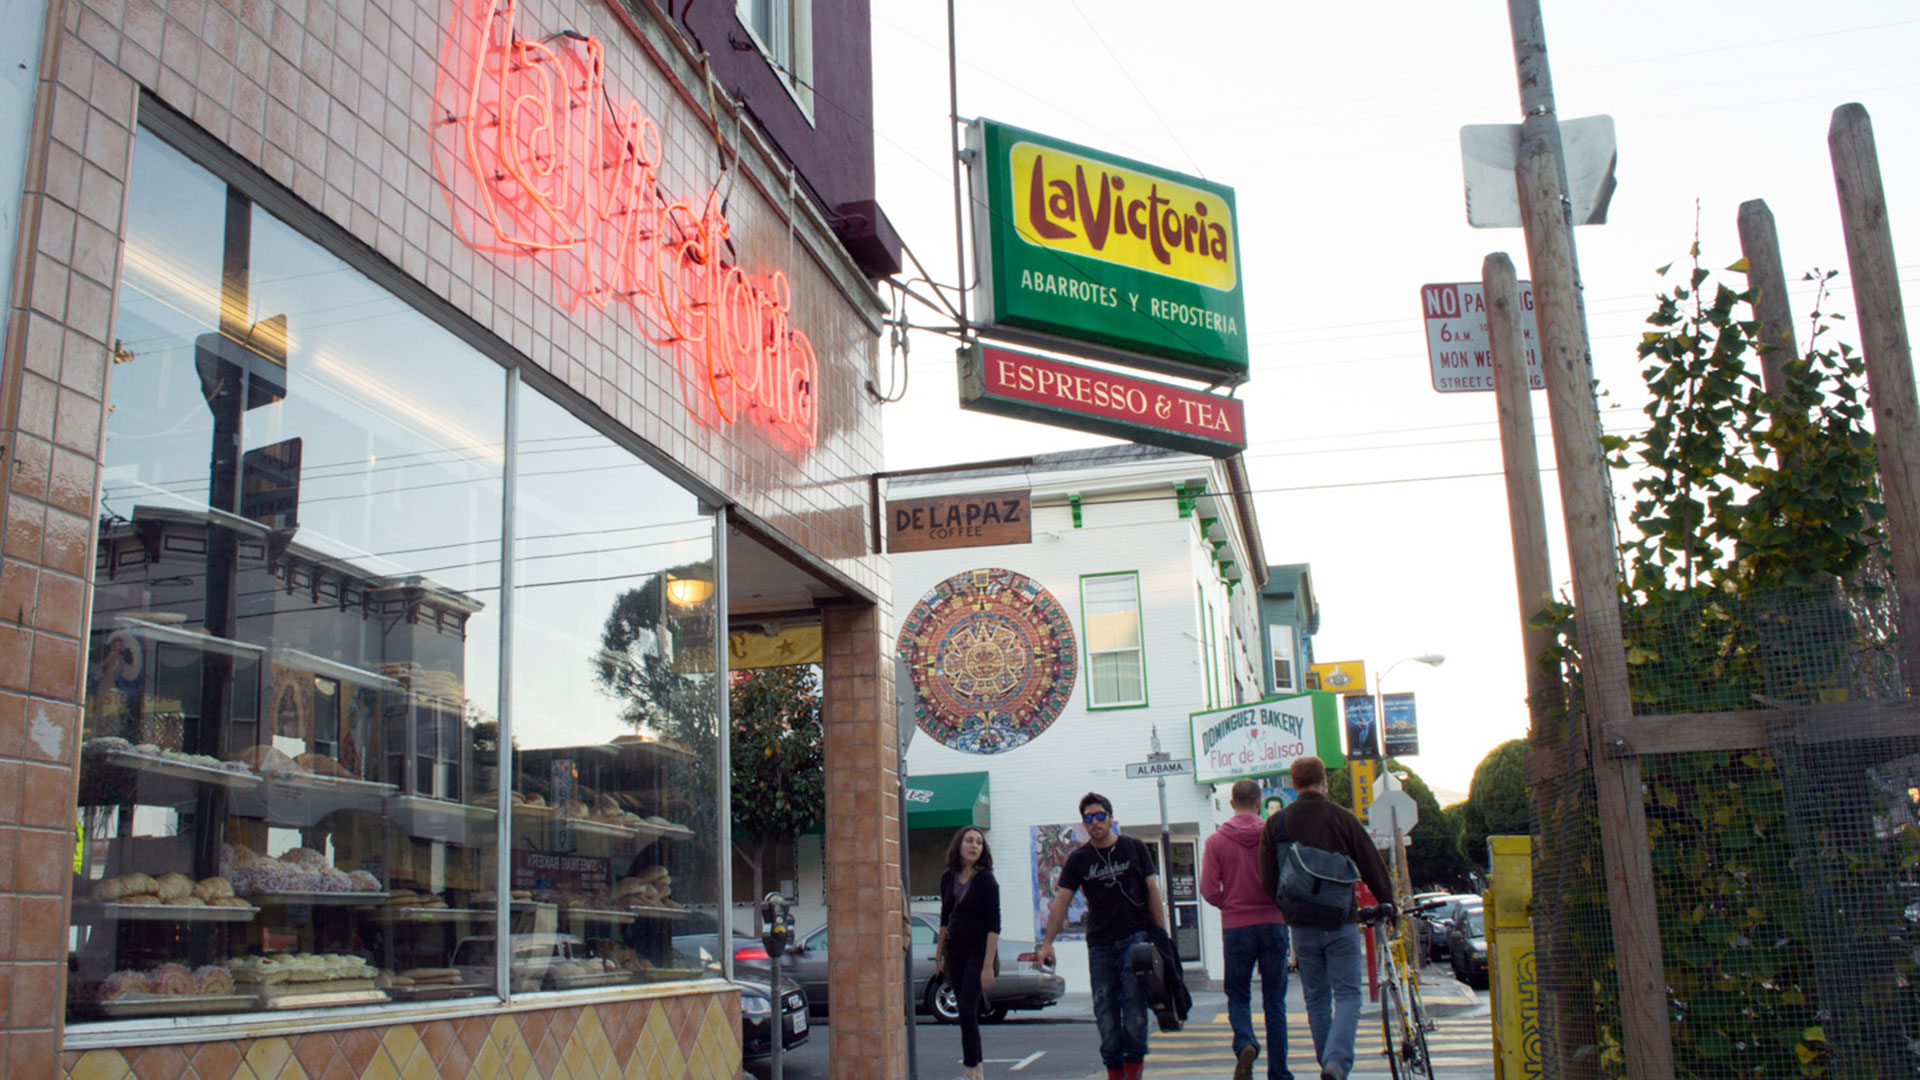 A neon sign reading La Victoria flickers above a glass window with rows of baked goods layed out behind it. A yellow, green and red sign sticks out from the corner of the building advertising abarrotes y reposteria.